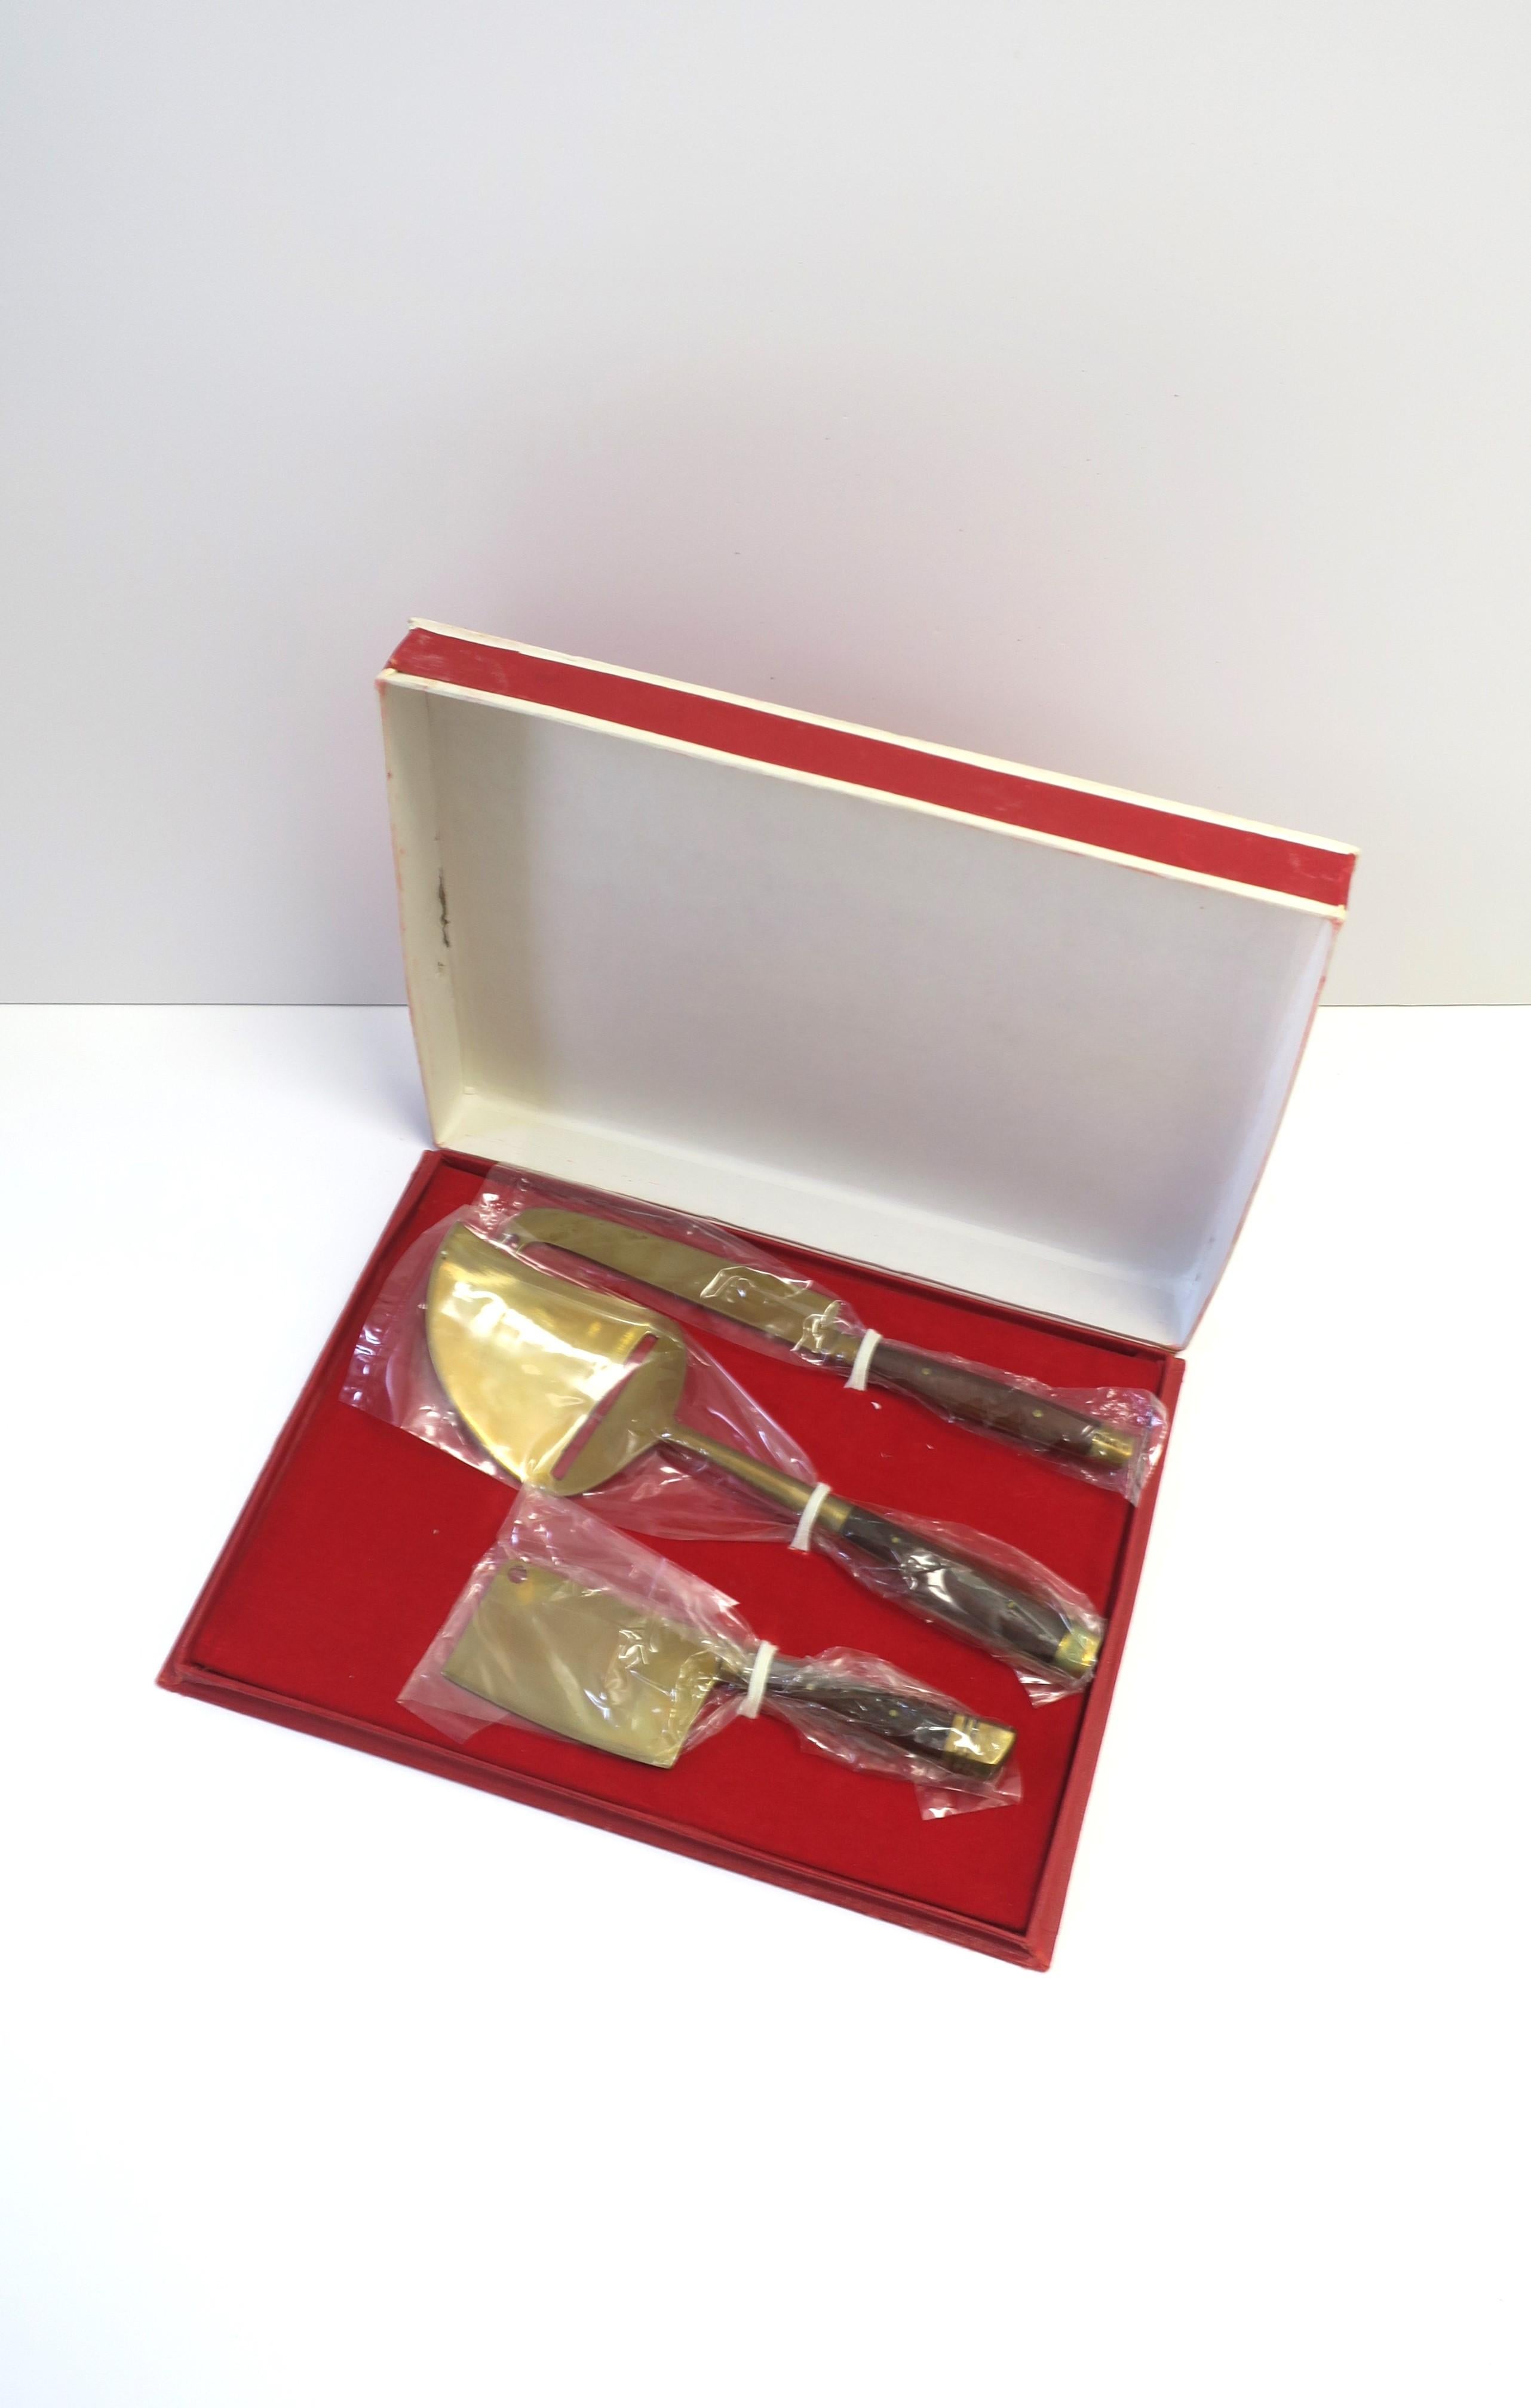 A Scandinavian Modern style rosewood and brass cheese, meat, pate, and more, cutlery set, circa mid-20th century, 1950s - 1960s. Pieces are brass with rosewood handles. A great set for everyday use or entertaining. Set has never been used (as